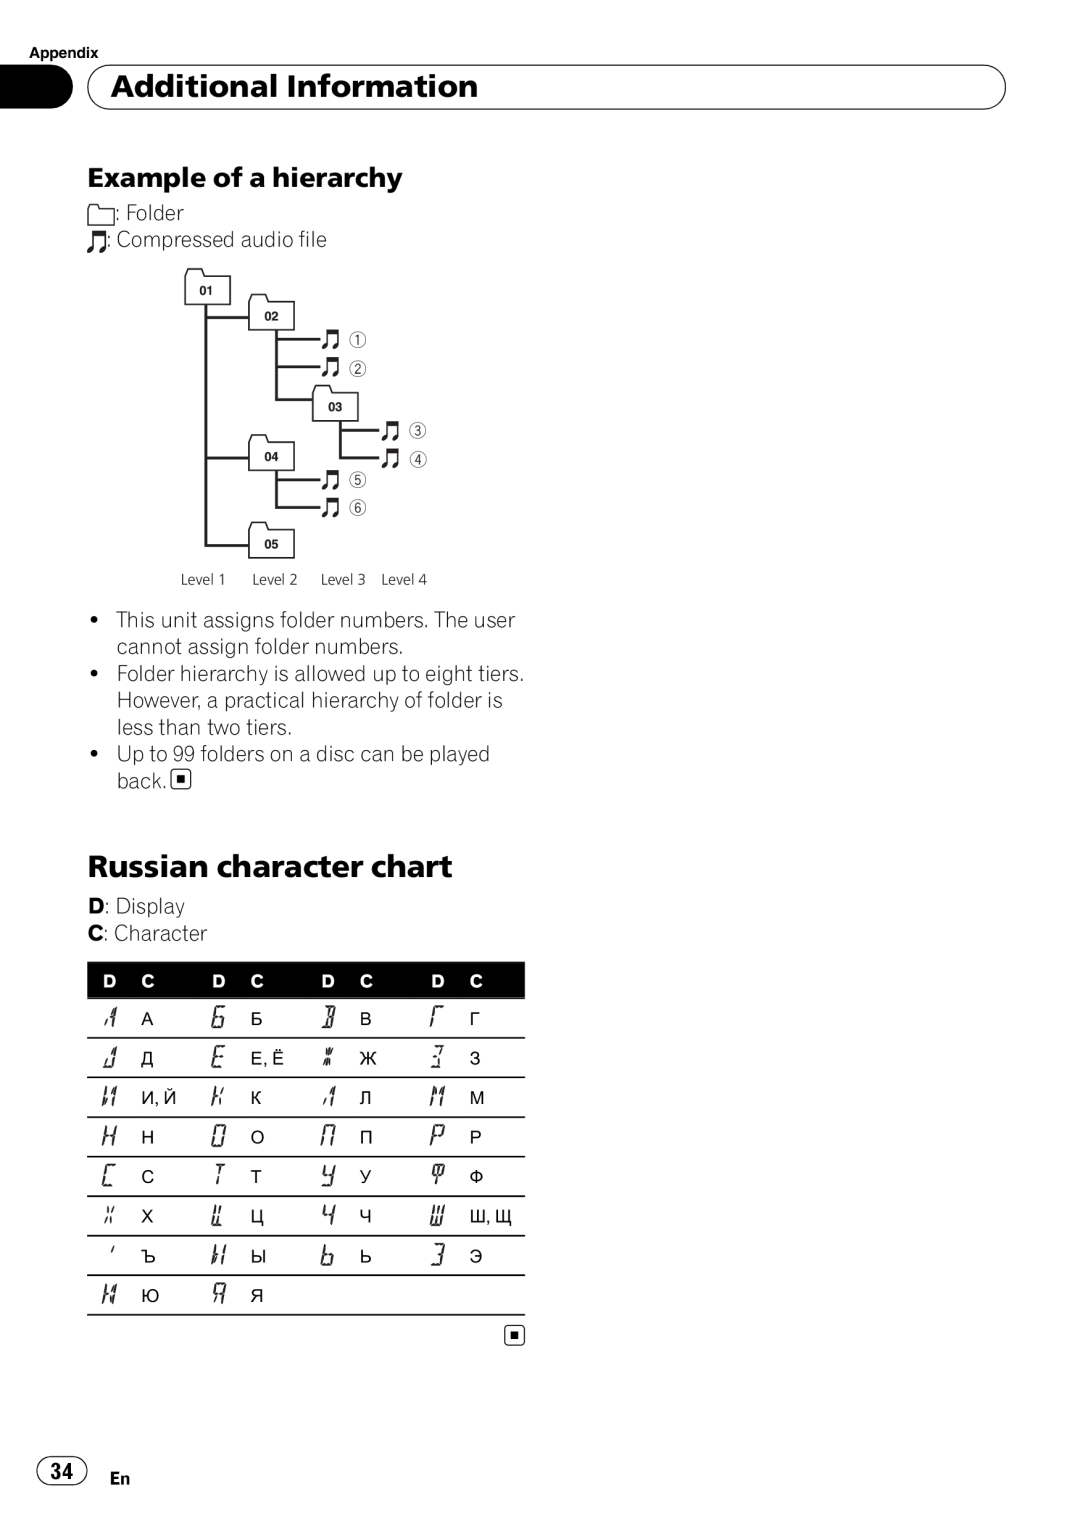 Pioneer DEH-5000UB, DEH-4000UB operation manual Russian character chart, Example of a hierarchy, Additional Information 